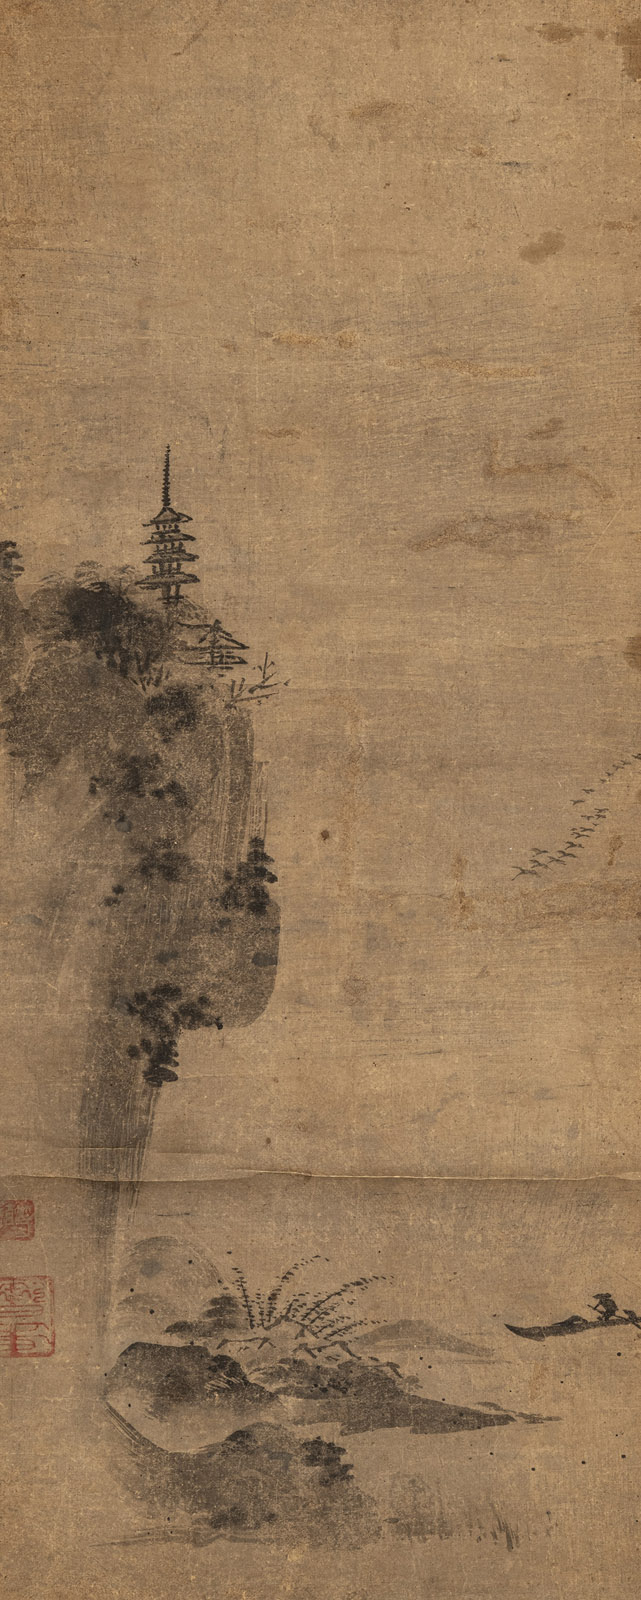 A HANGING SCROLL WITH A PAGODA IN A MOUNTAIN LANDSCAPE